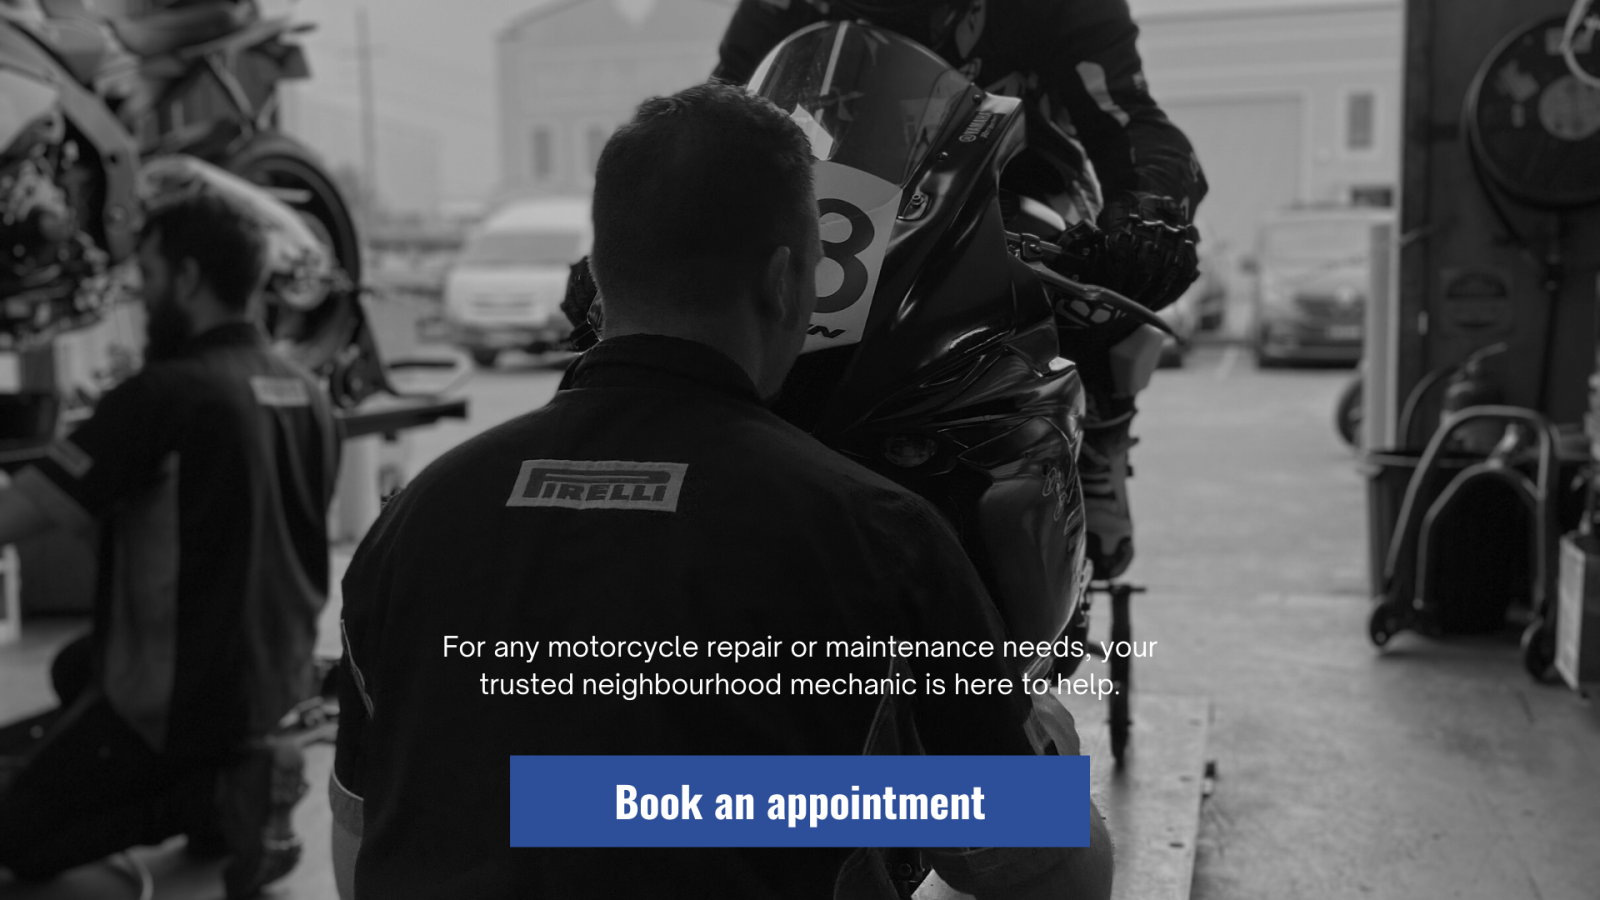 For any motorcycle repair or maintenance needs, your trusted neighbourhood mechanic is here to help.